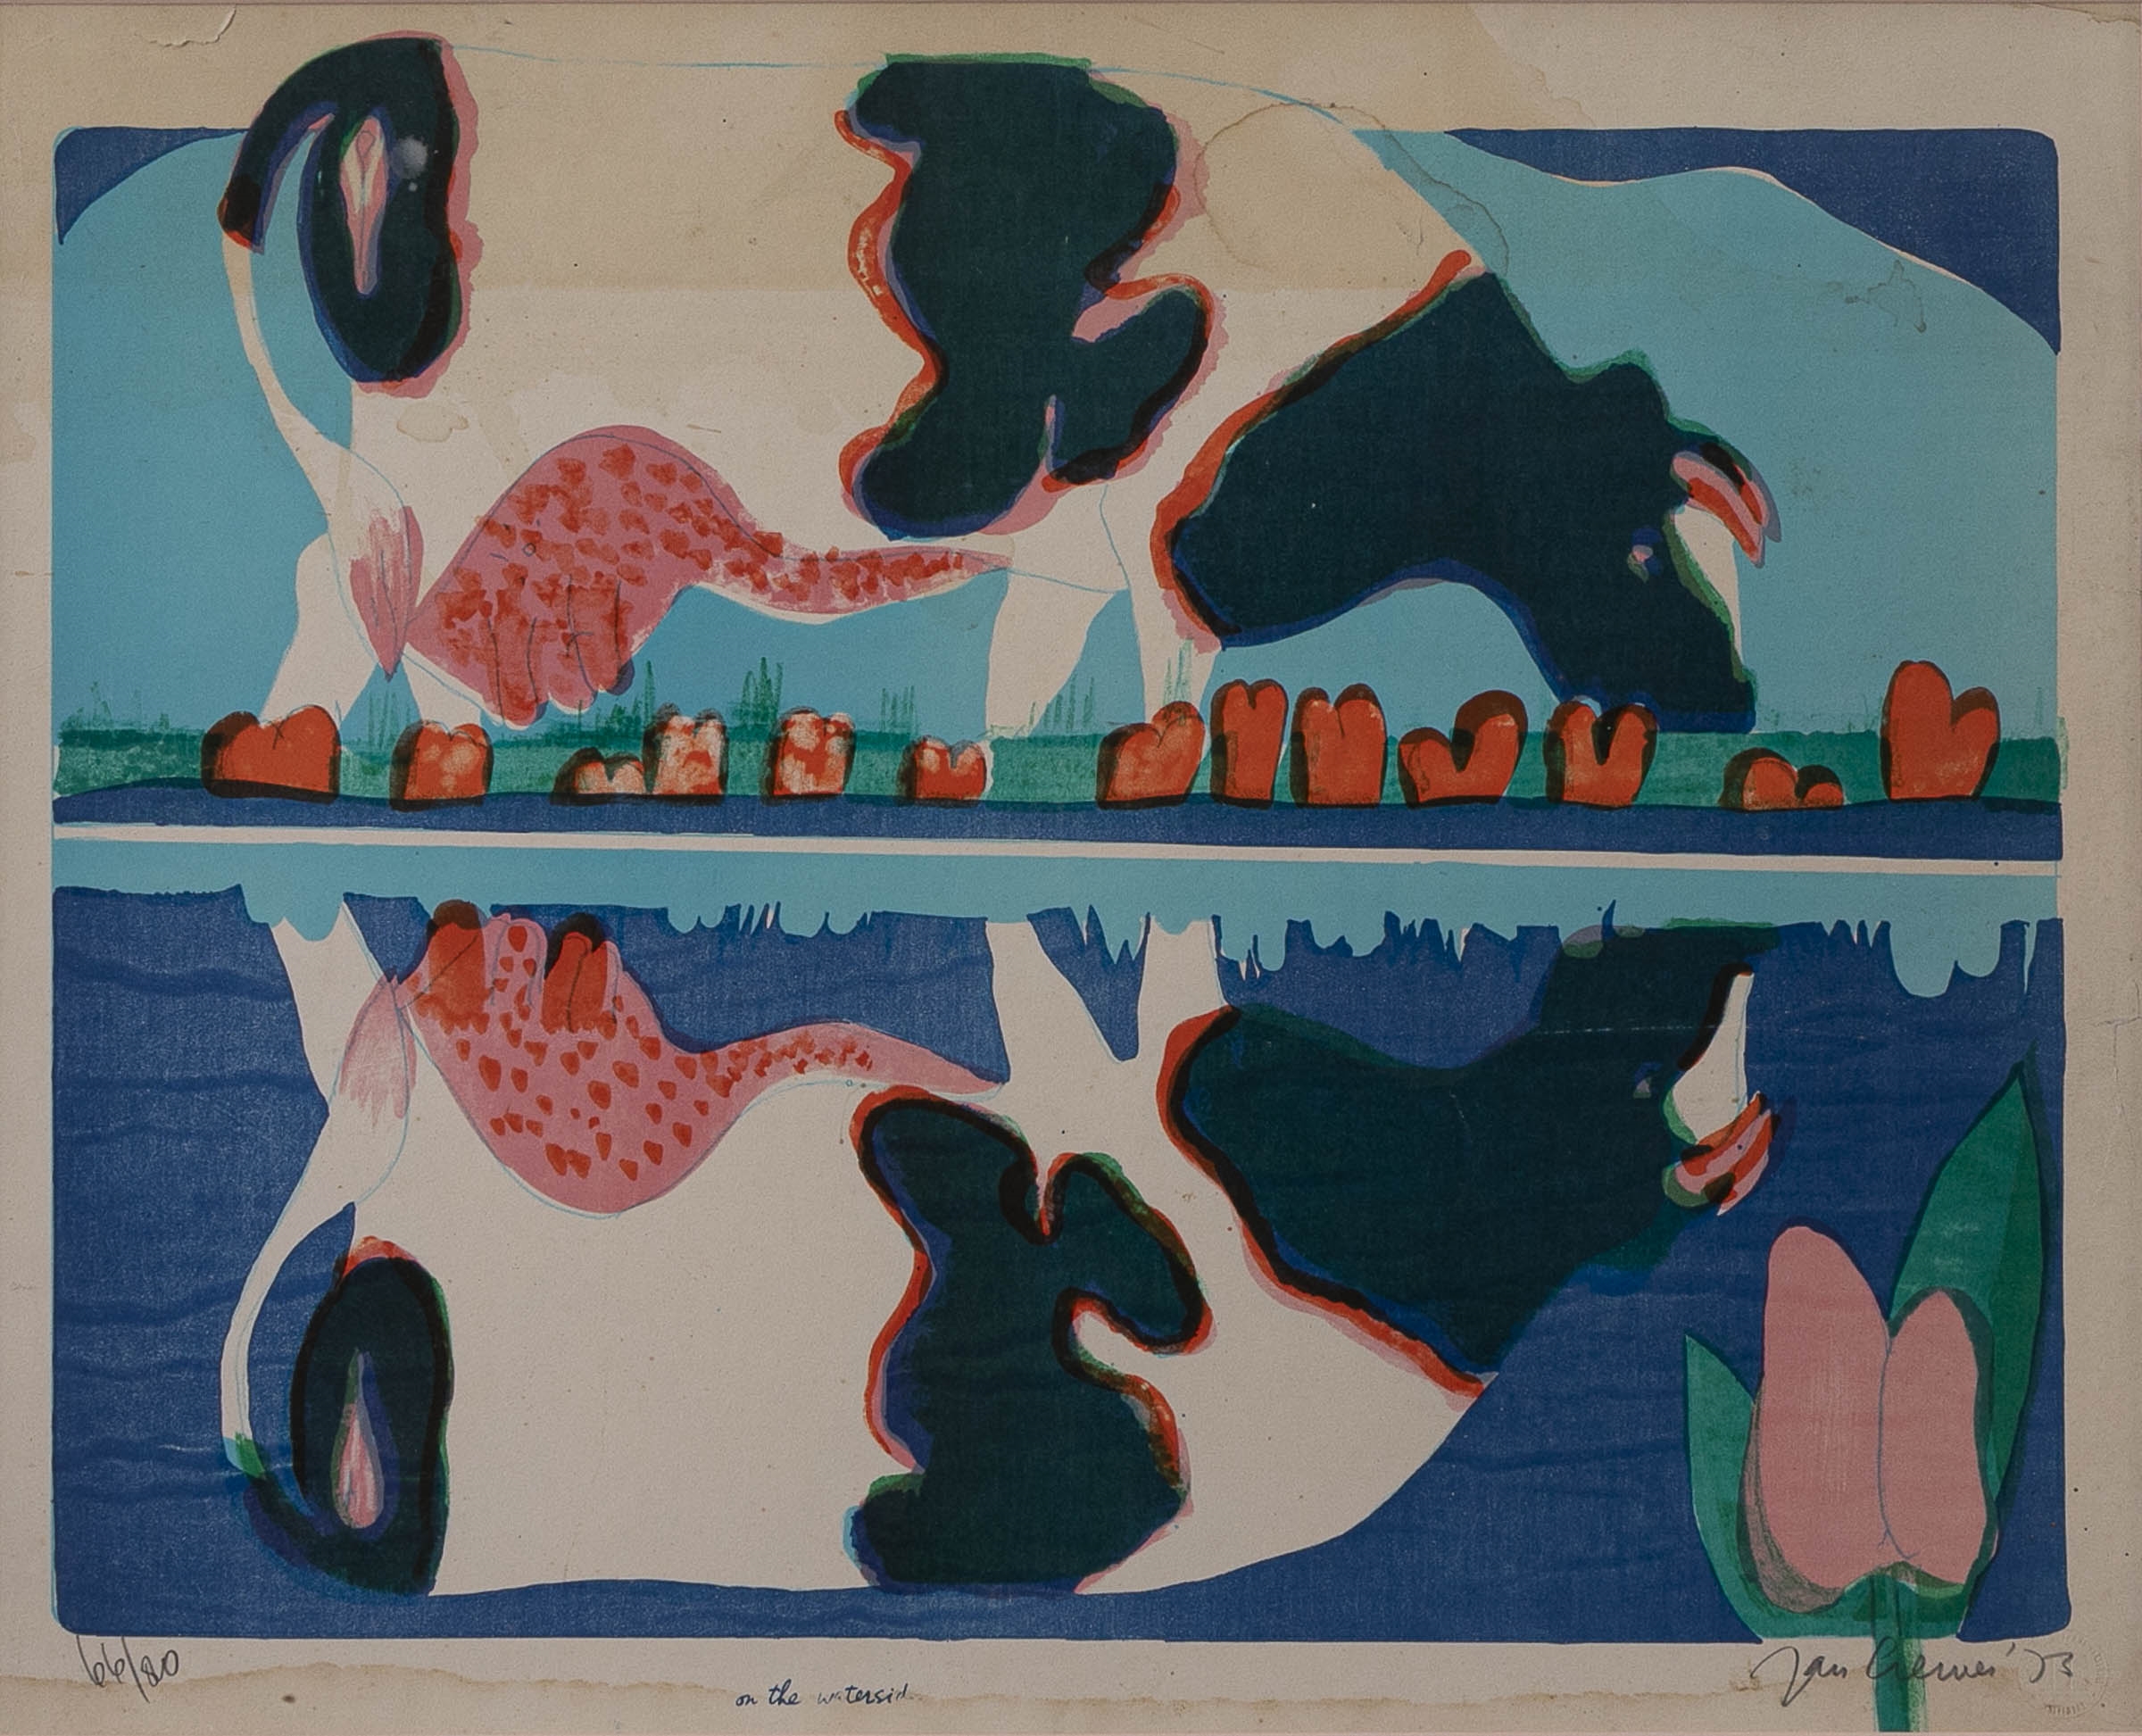 Artwork by Jan Cremer, 'on the waterside', 1973, Made of Colour lithograph